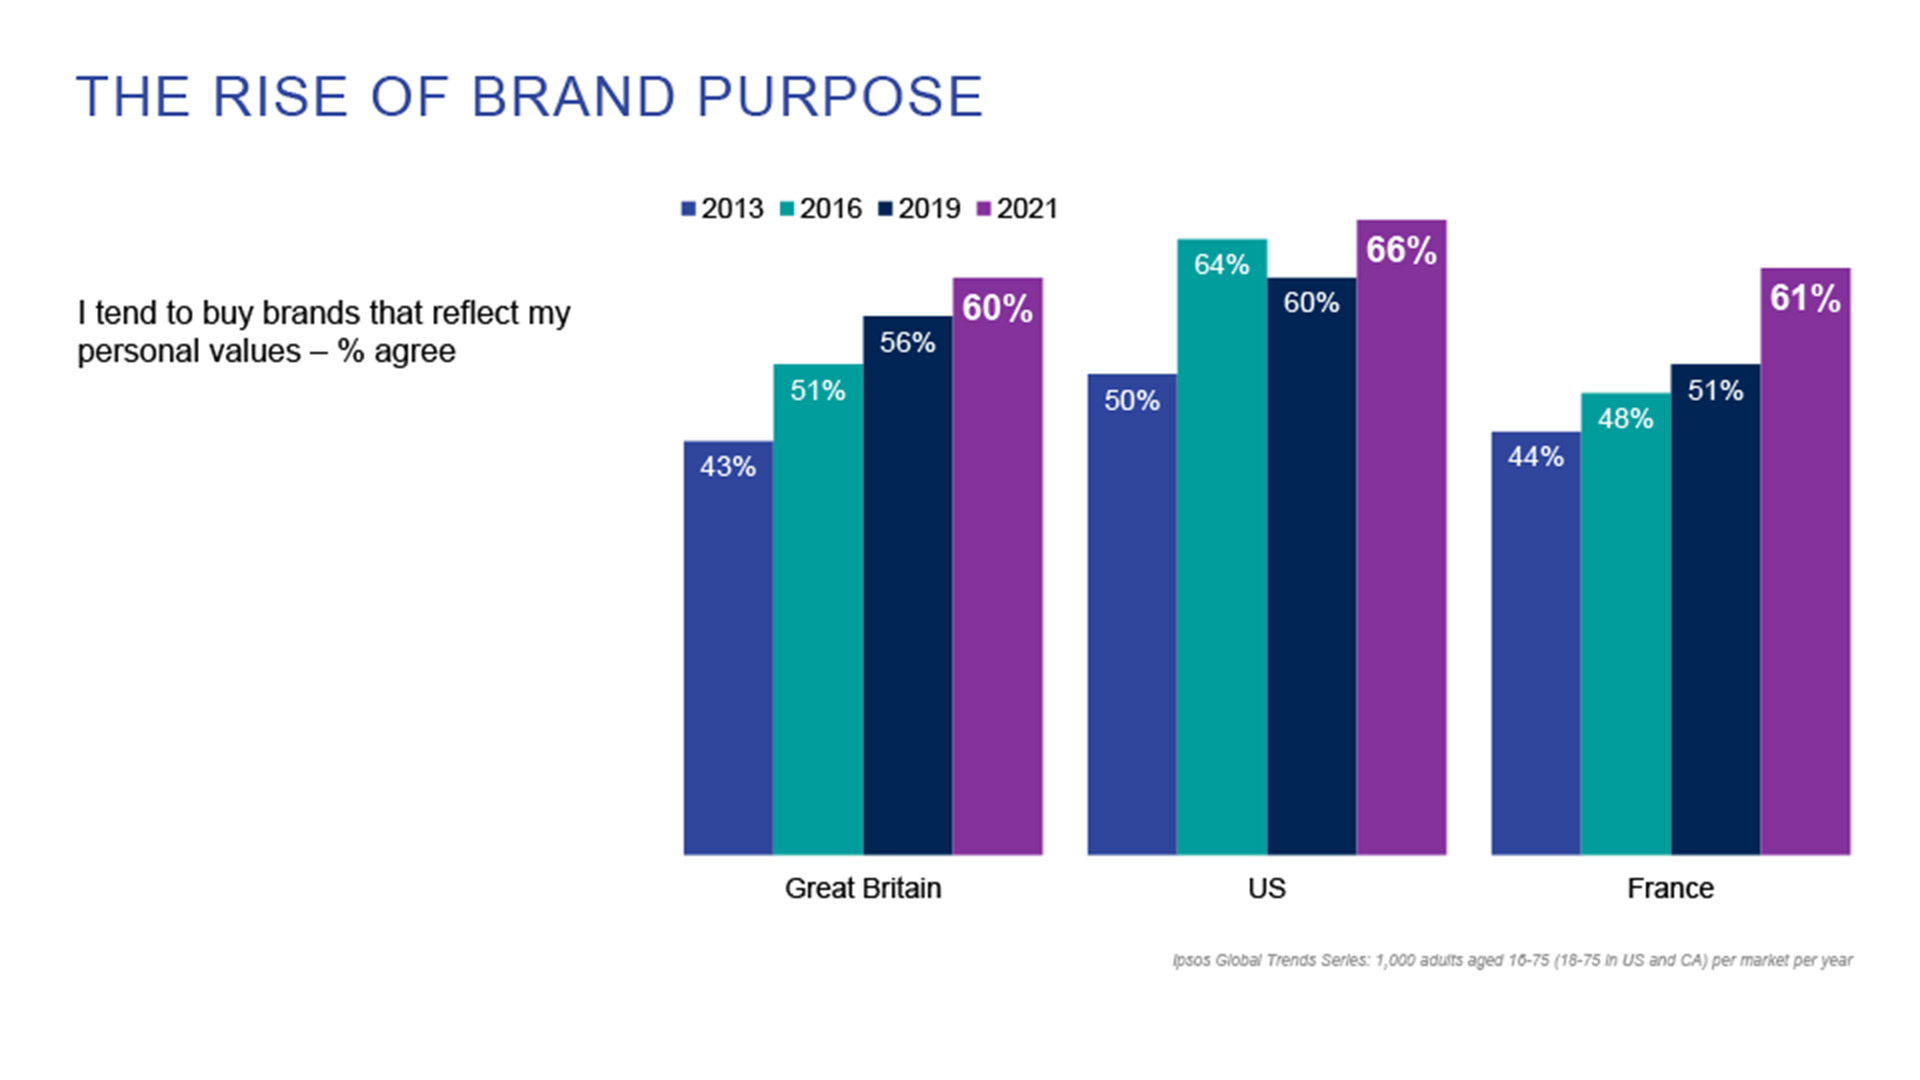 The rise of brand purpose chart